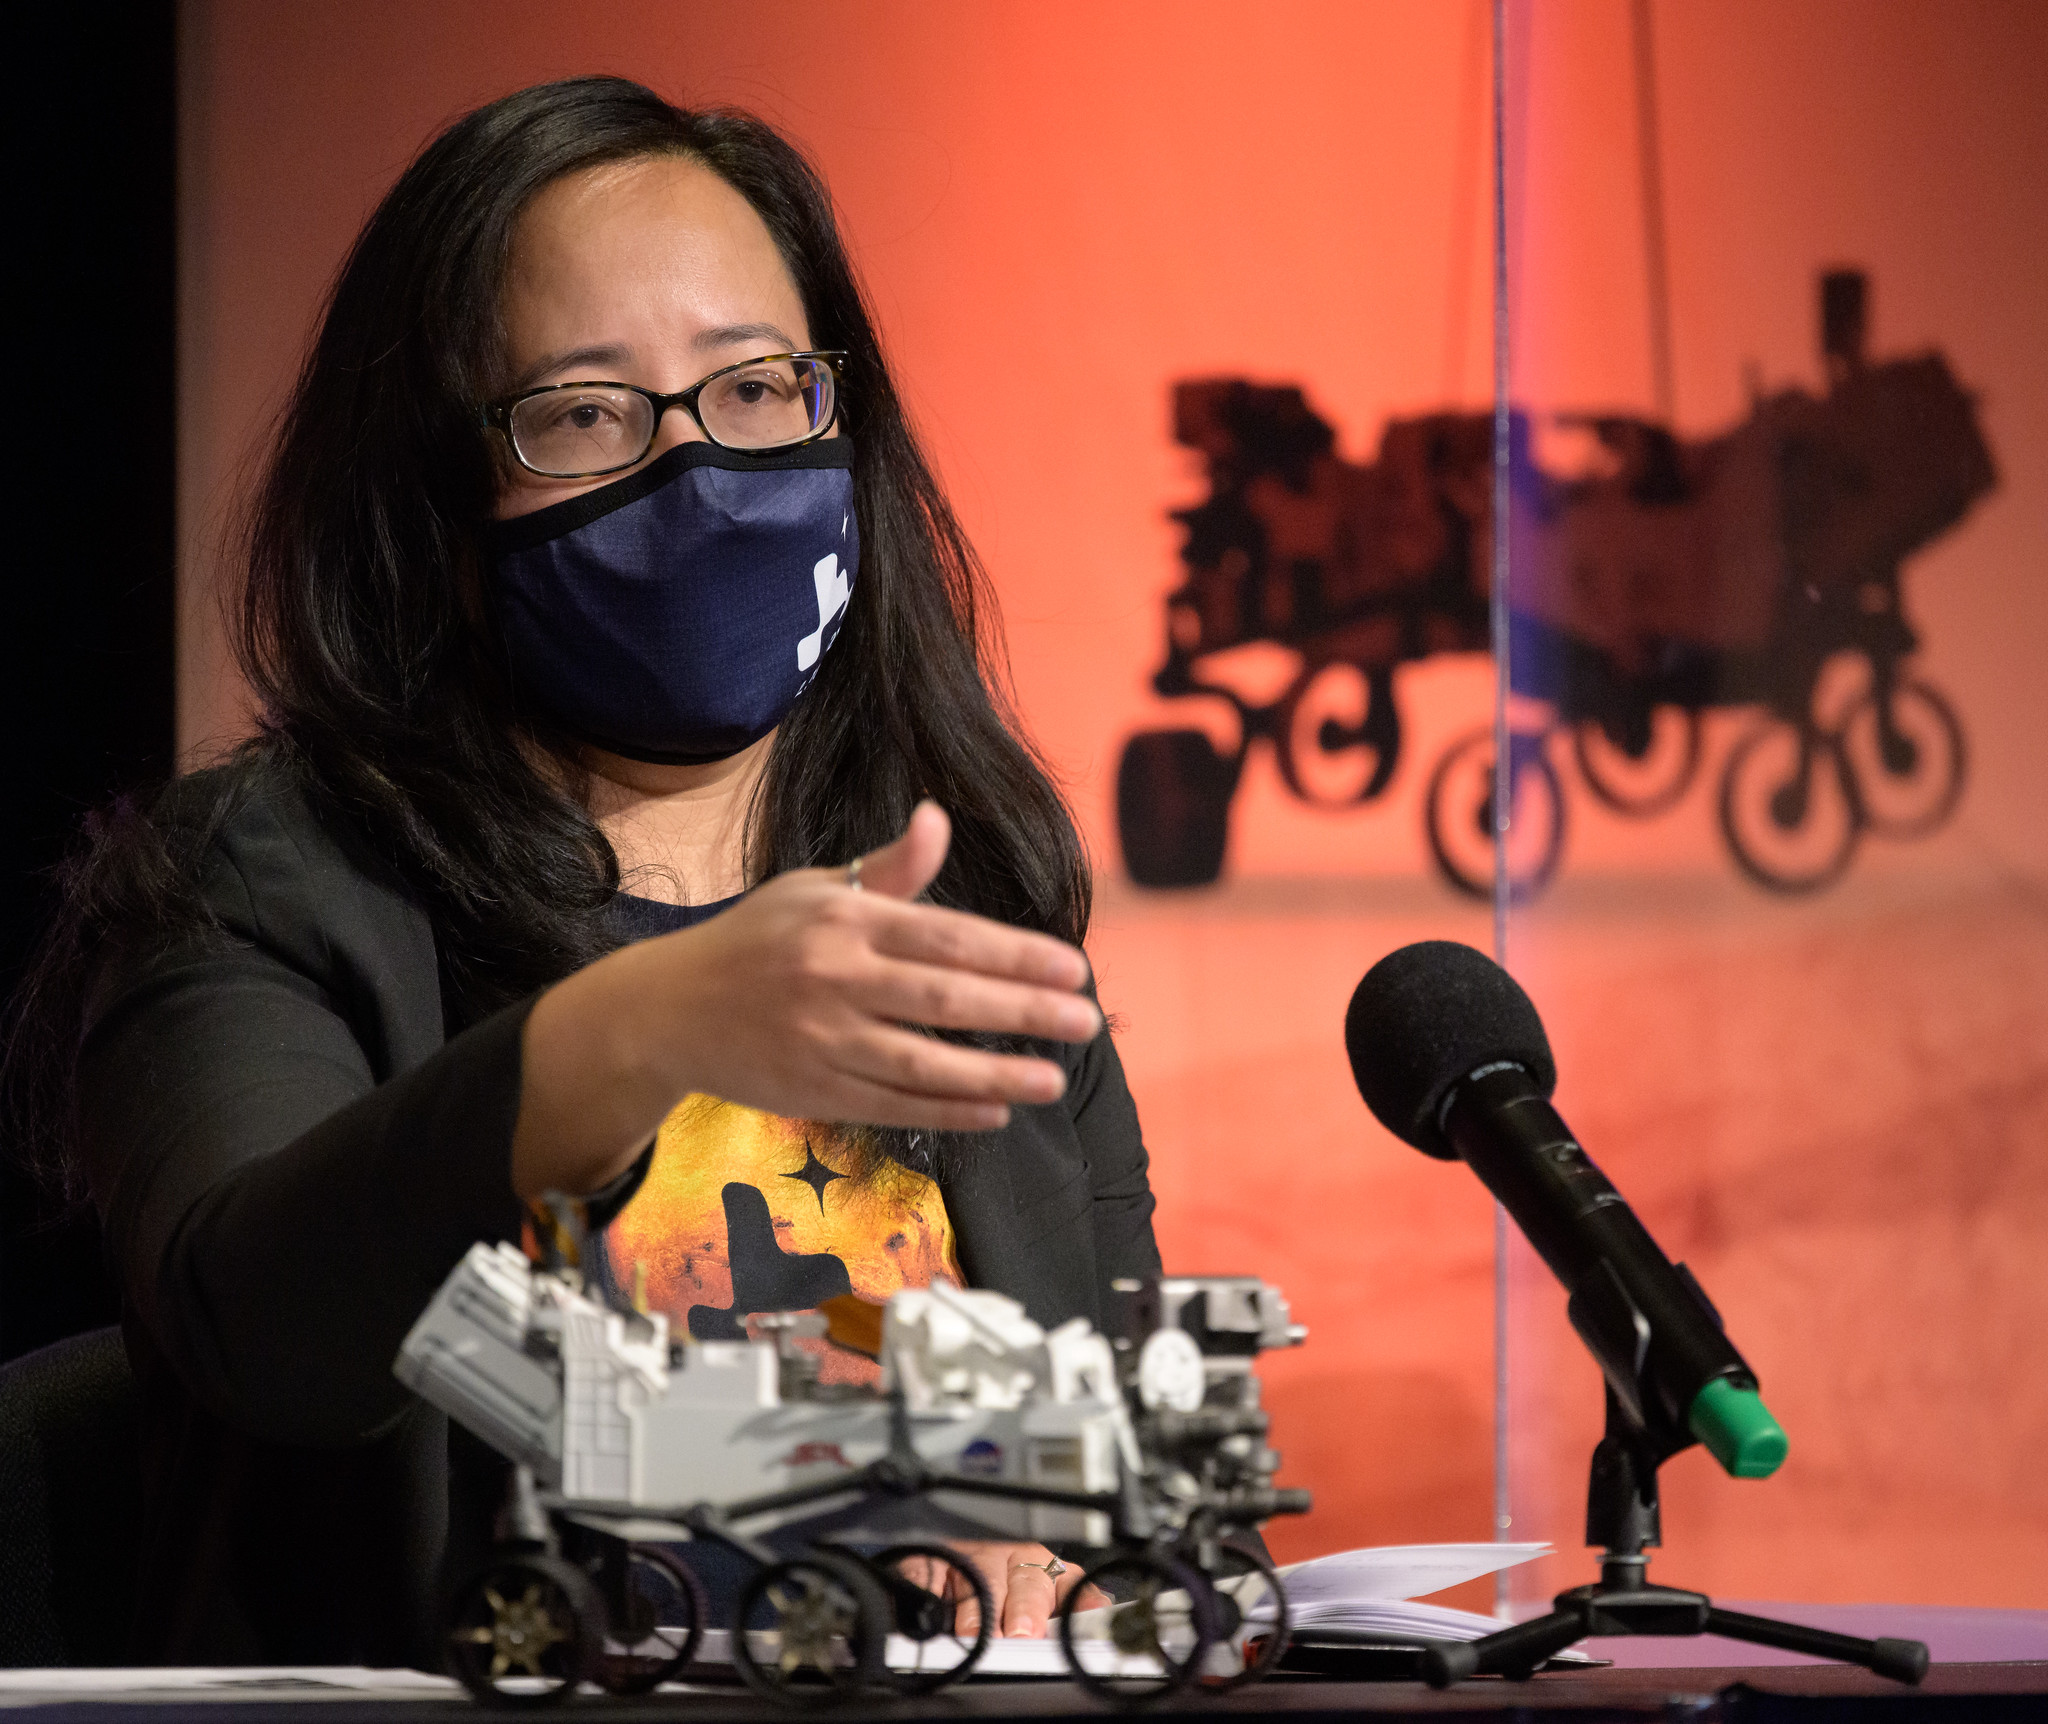 Mars Perseverance Surface Operations Manager Pauline Hwang